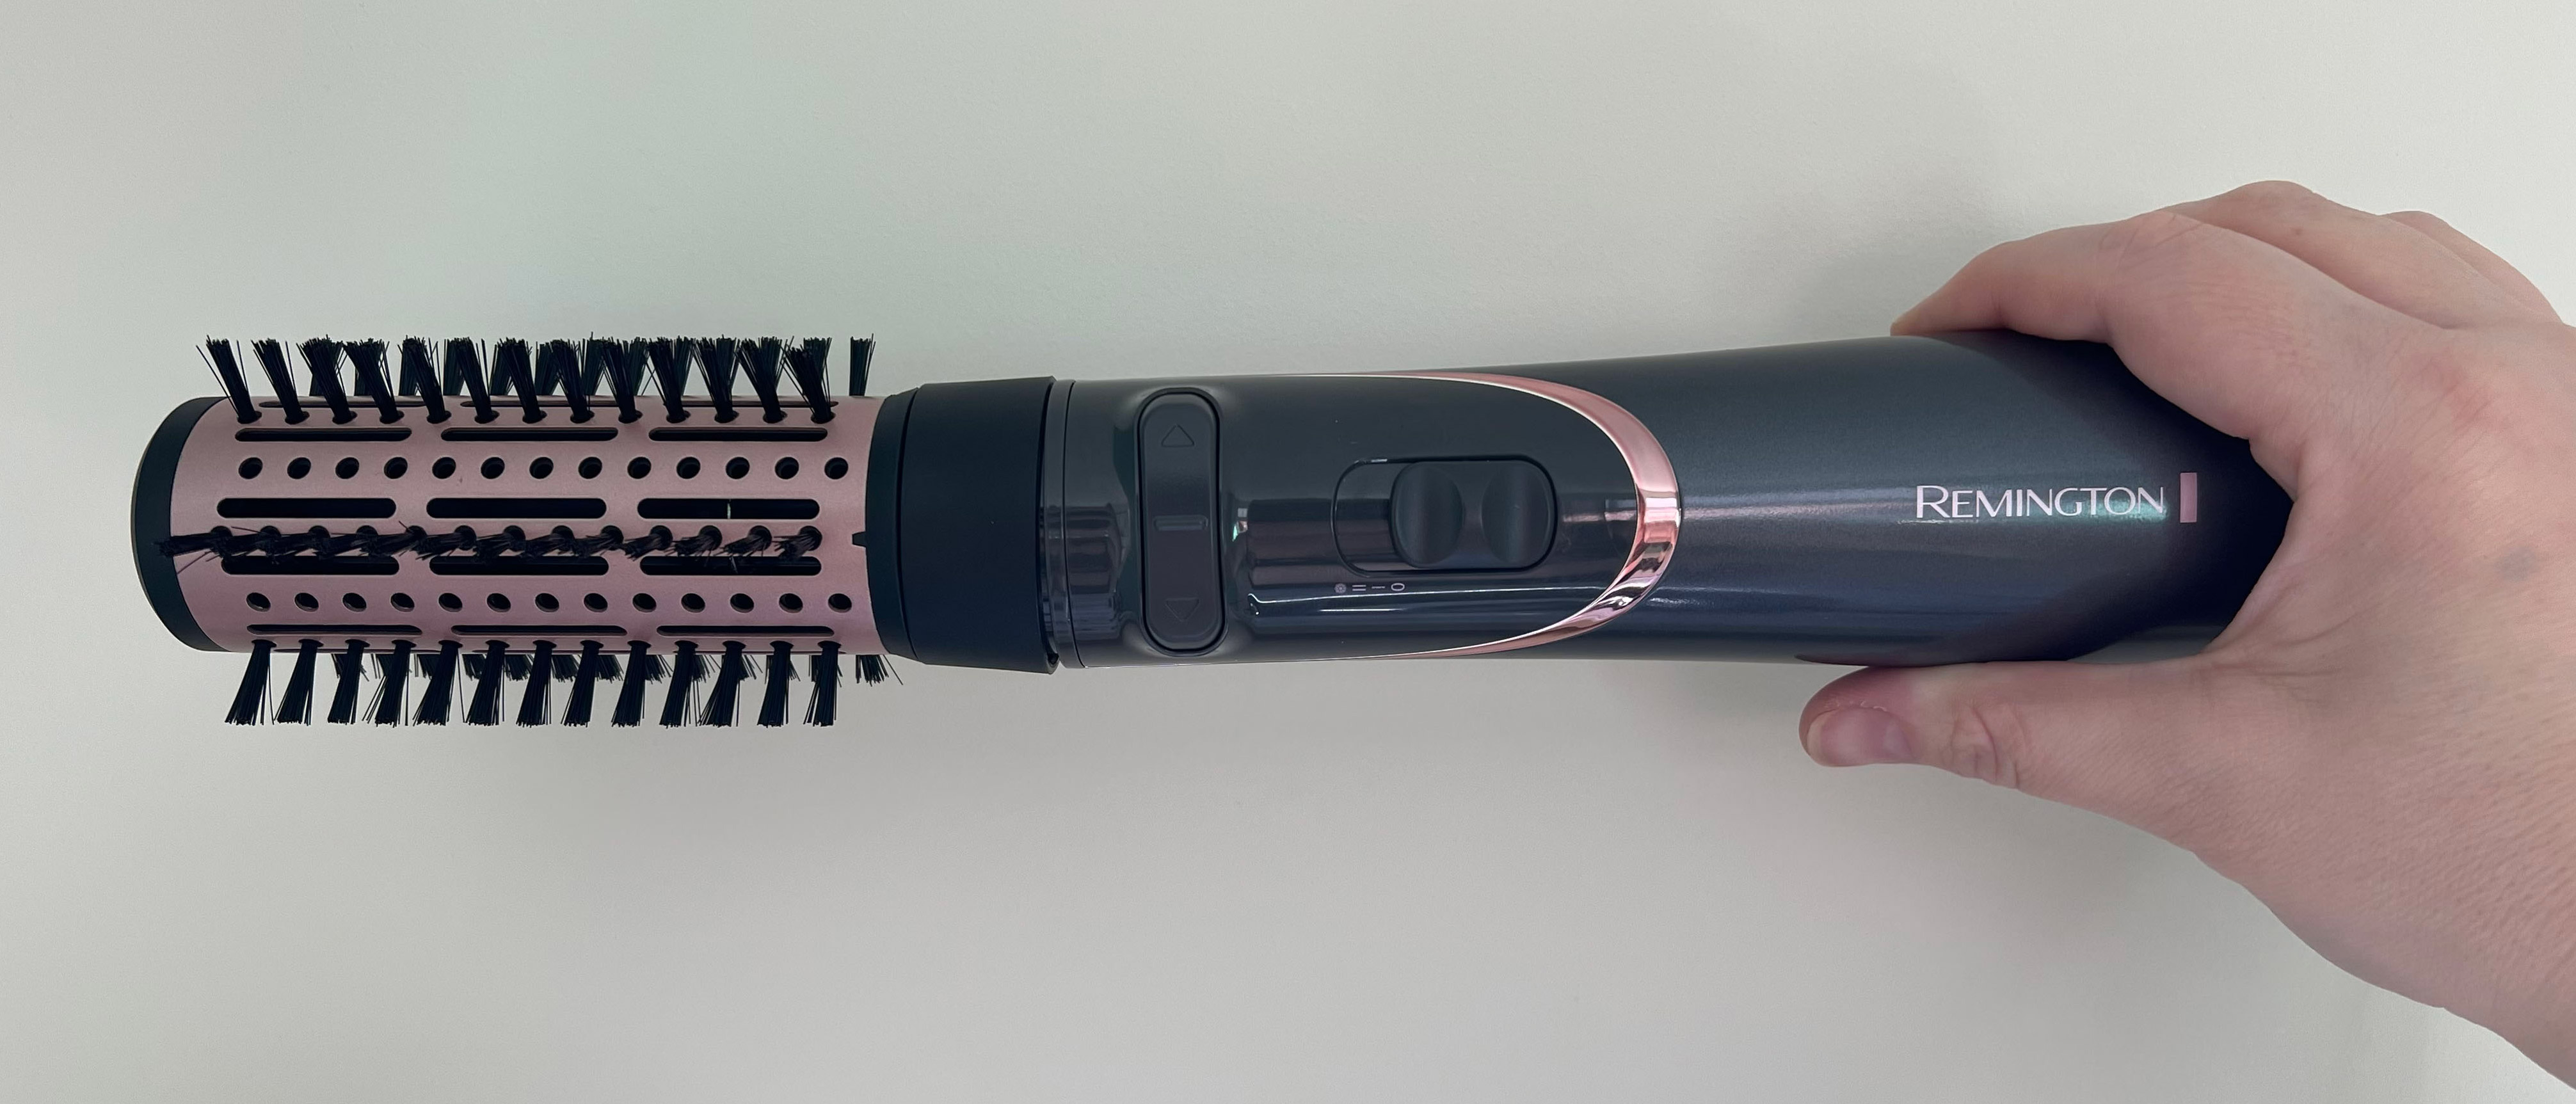 Remington Curl and Straight Confidence Airstyler AS8606 | TechRadar review